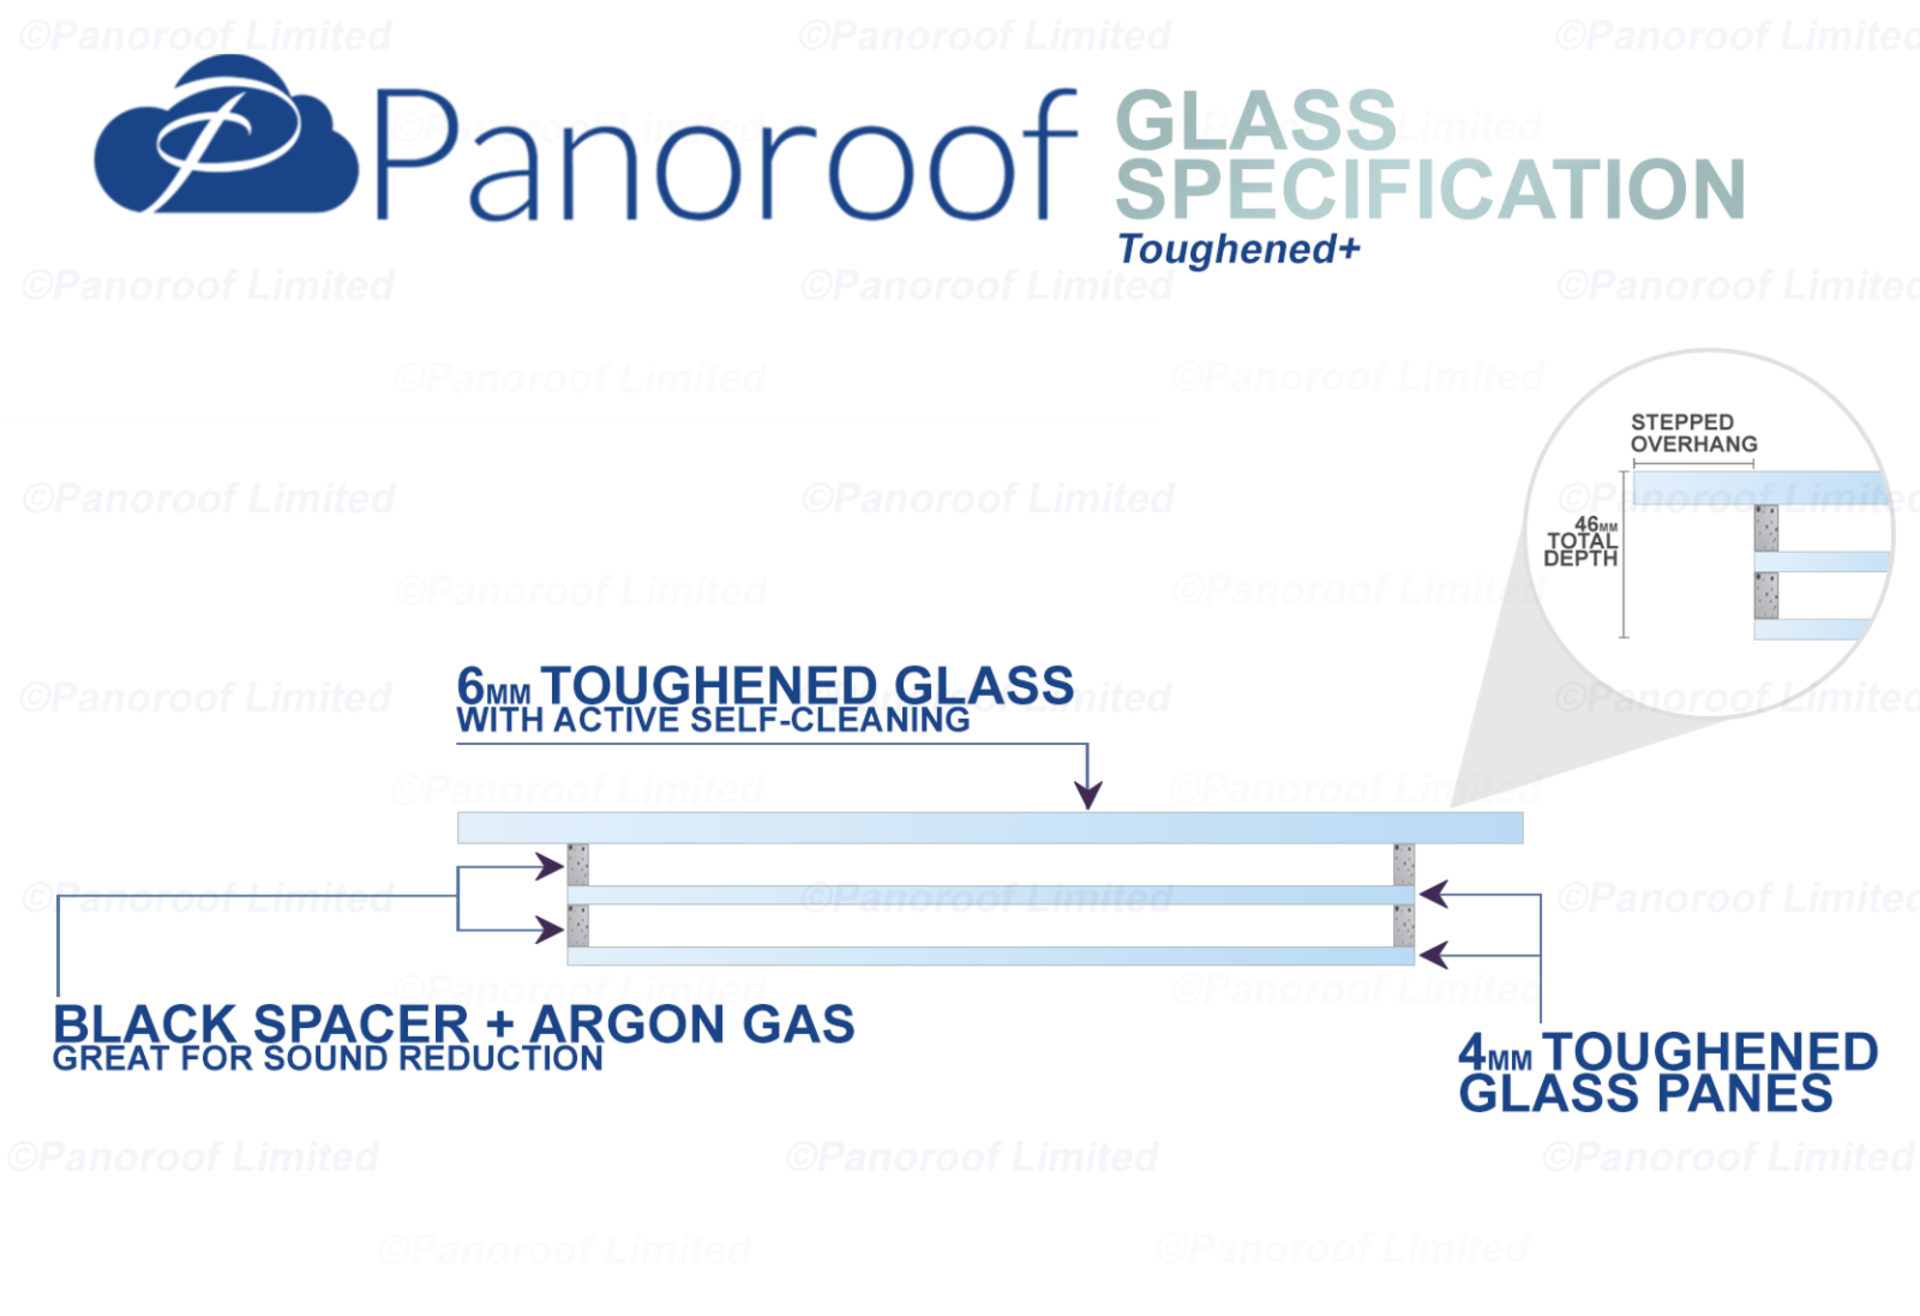 """Panoroof Triple Glazed Self Cleaning 700x1200mm (inside Size Visable glass area) Seamless Glass - Image 5 of 6